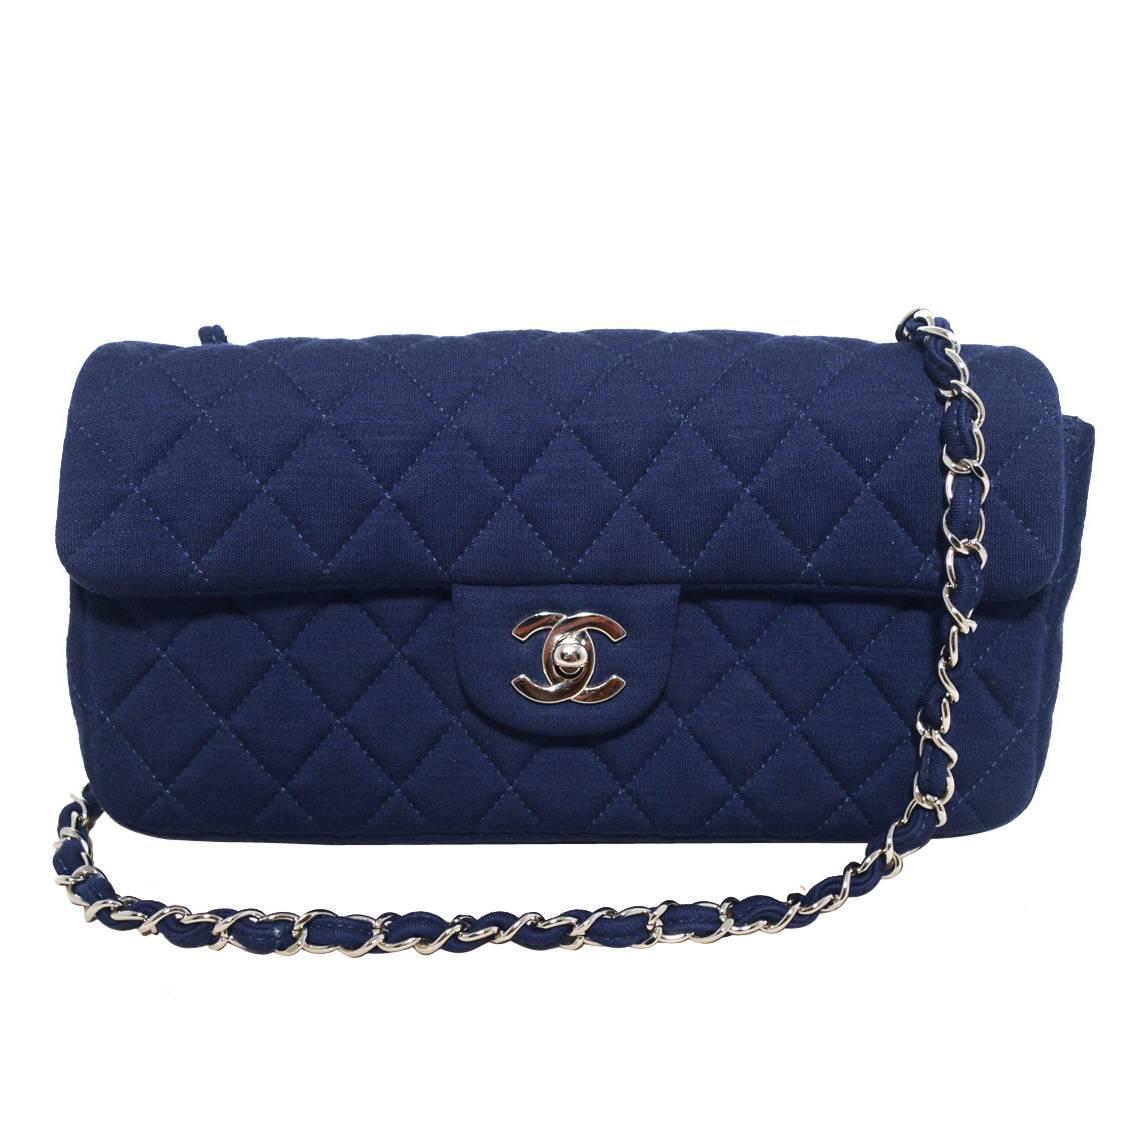 CHANEL Navy Quilted Cotton Classic Flap Shoulder Bag